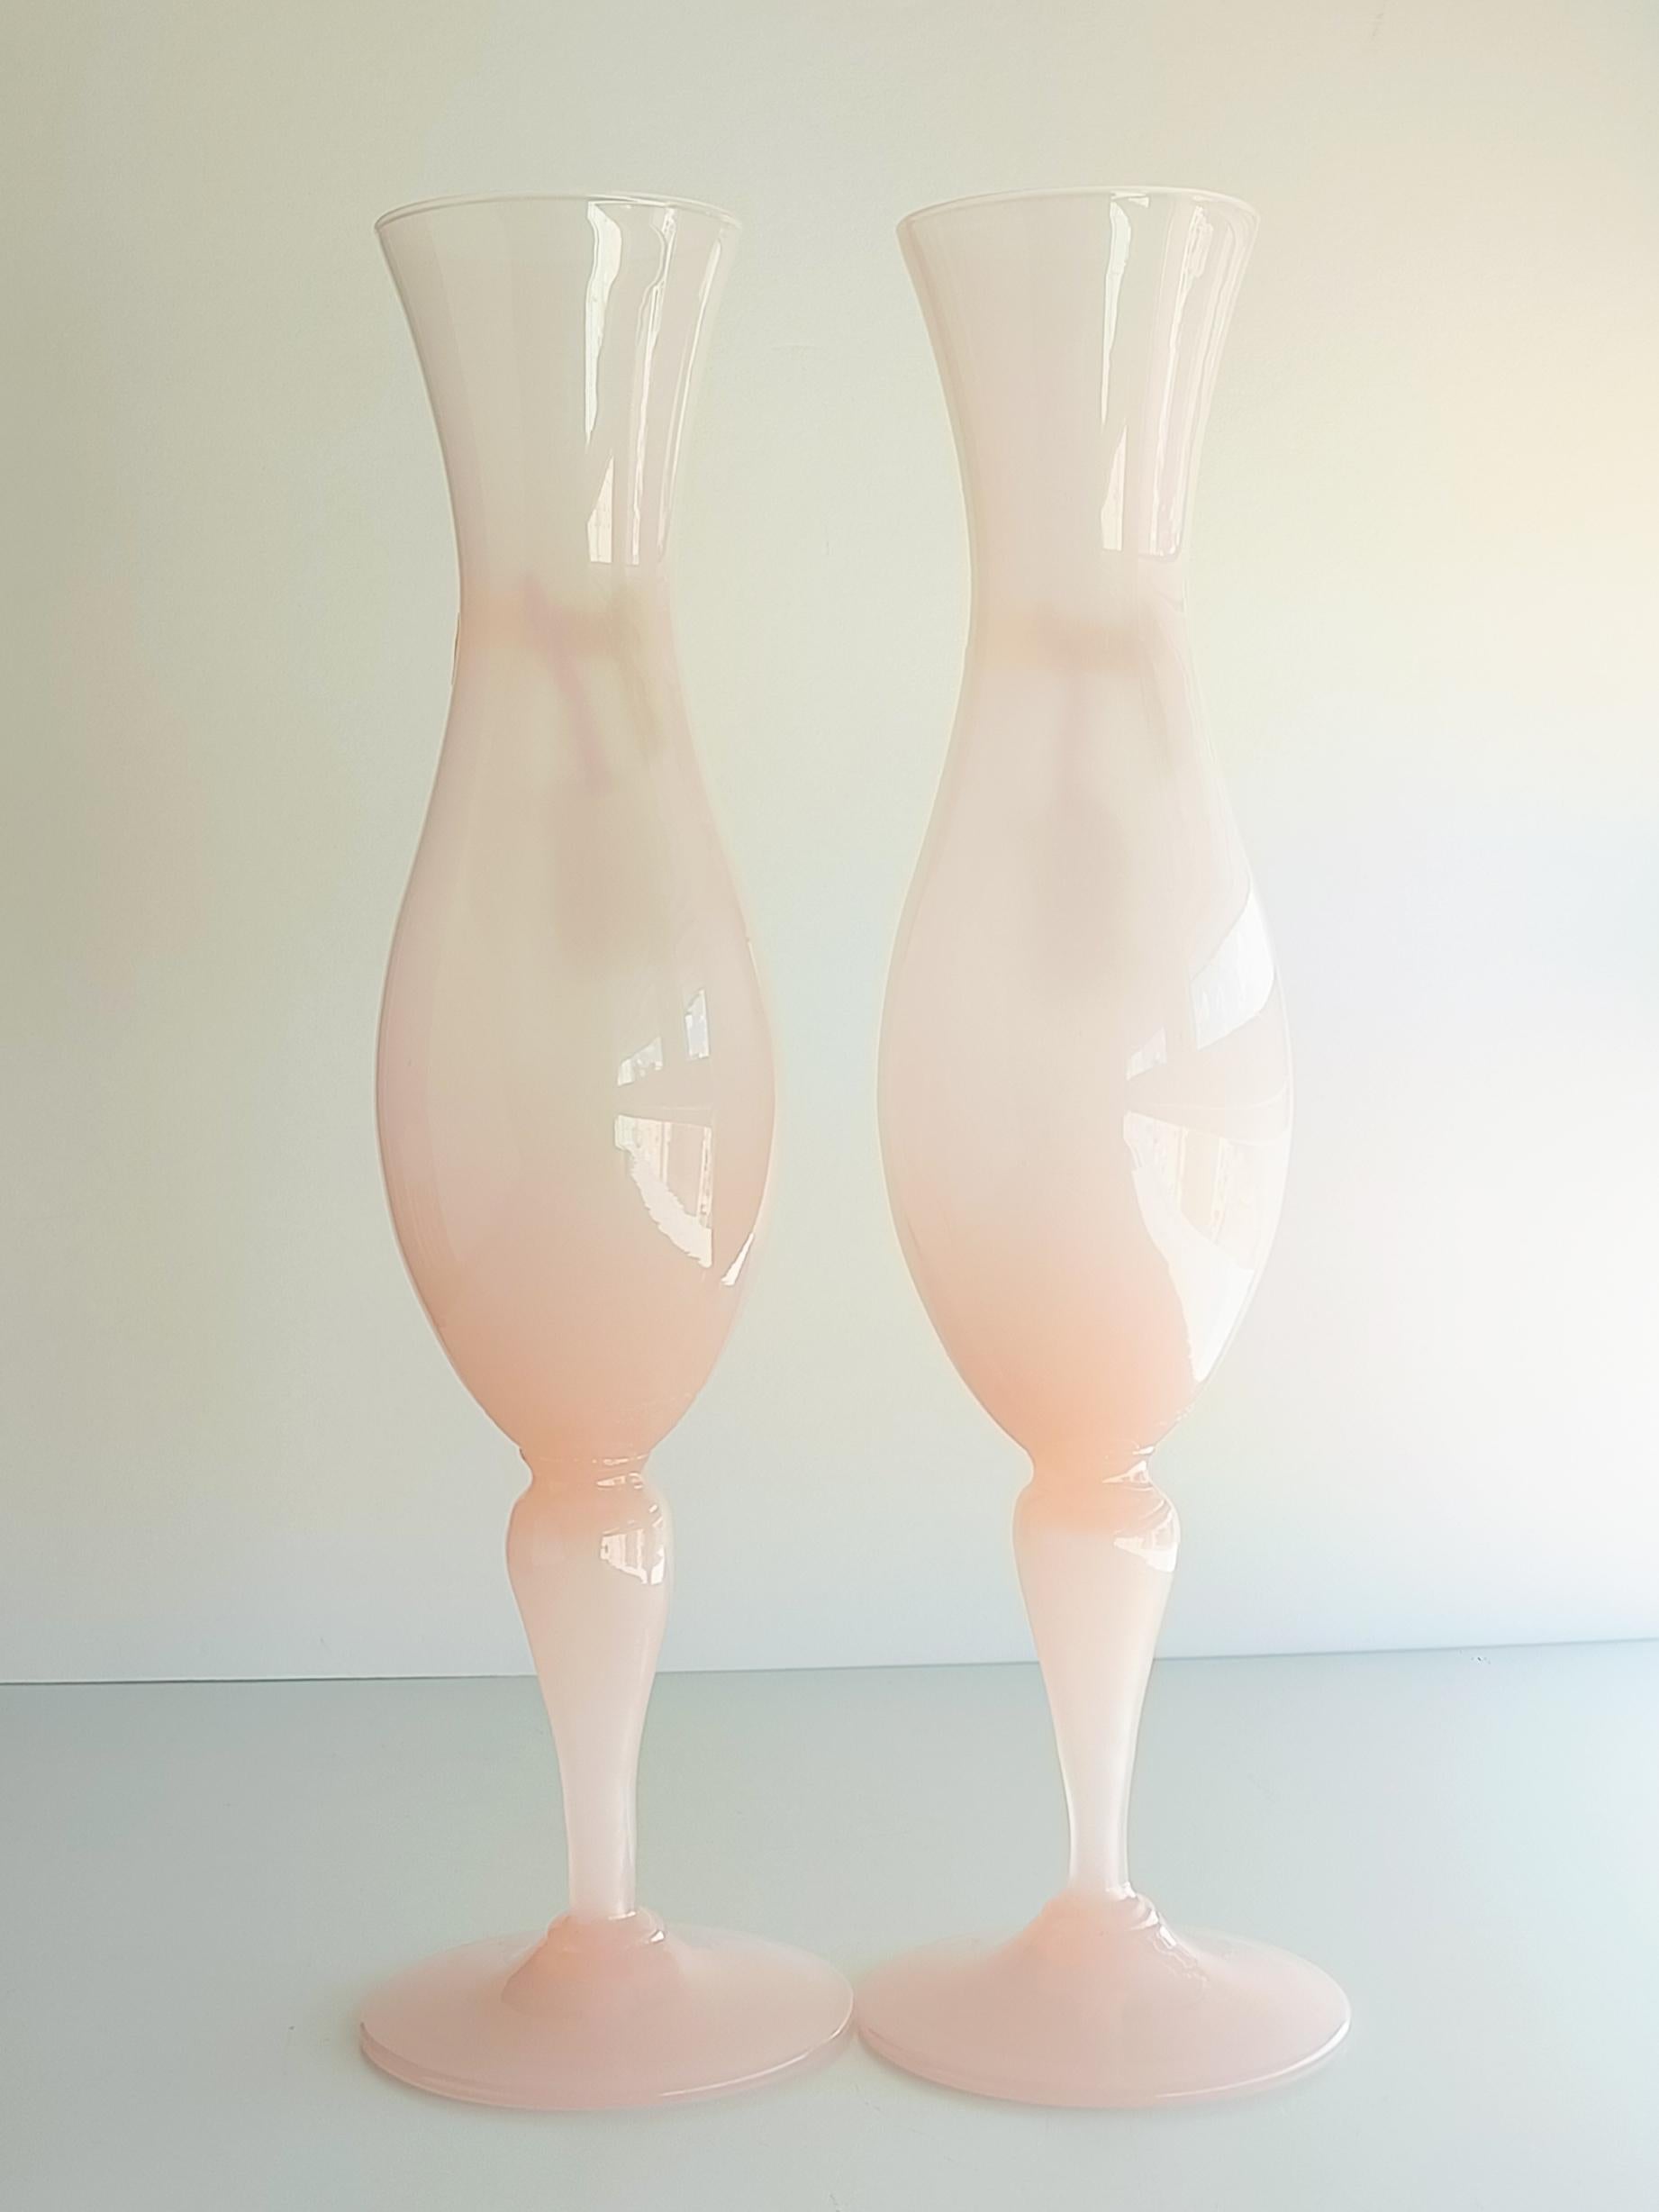 Beyond elegant large pearly translucent real opal Empoli glass labelled Opalina Florentina Cup-Vases.

These vases were stocked by decades (since the 1950s) in the basement of a glass and porcelain gifts shop in Florence until recently - the venue